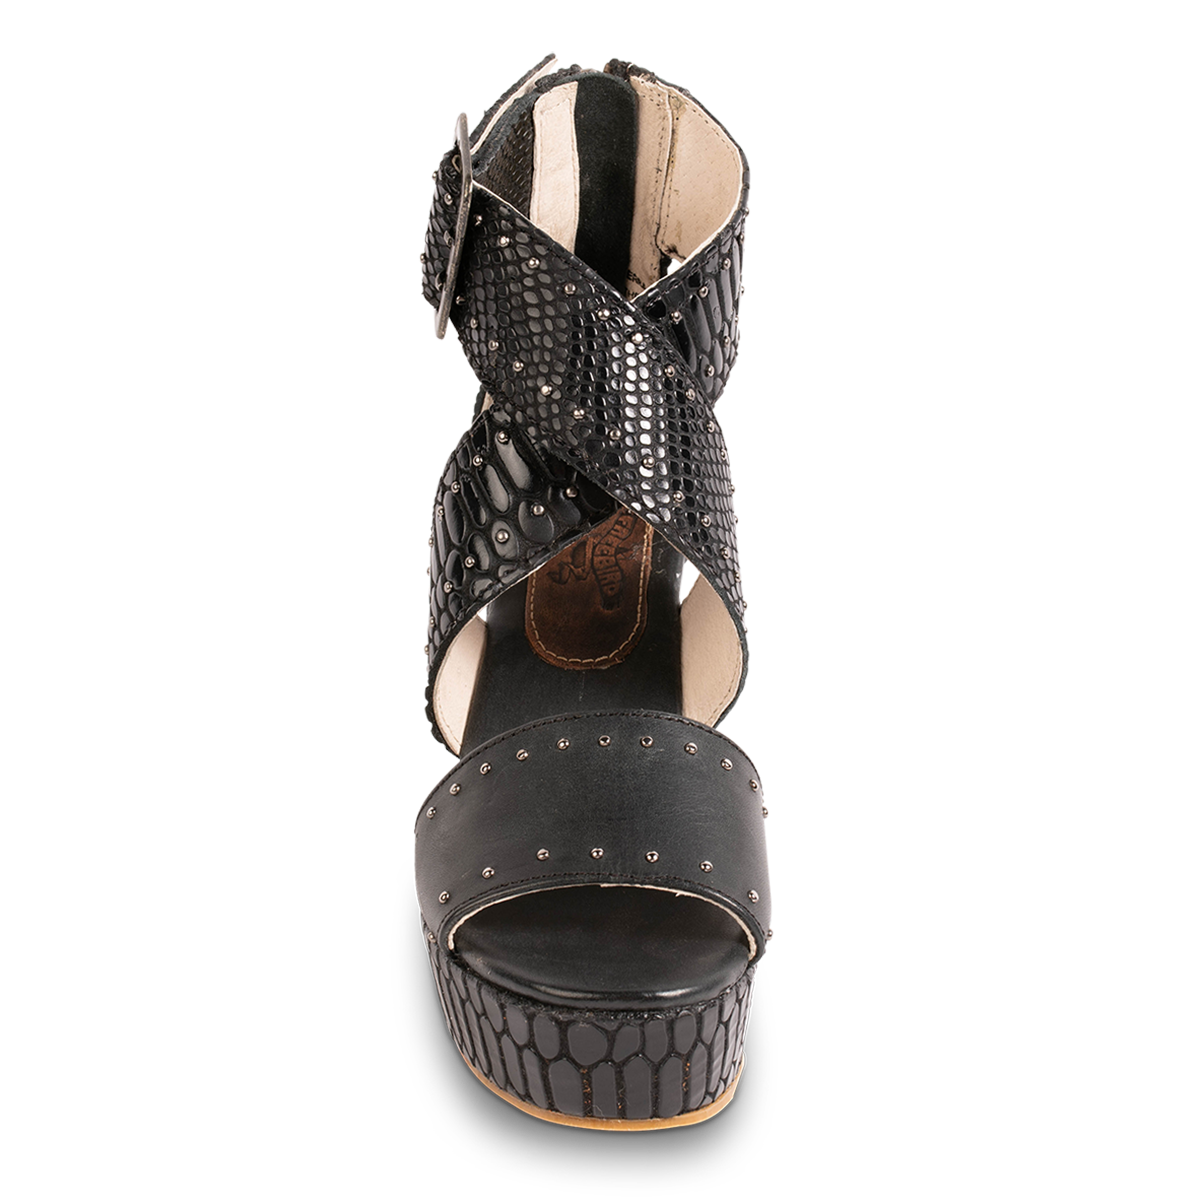 Front view showing cross-over ankle straps on FREEBIRD women's Terra black snake platform sandal with wedge heel and stud detailing